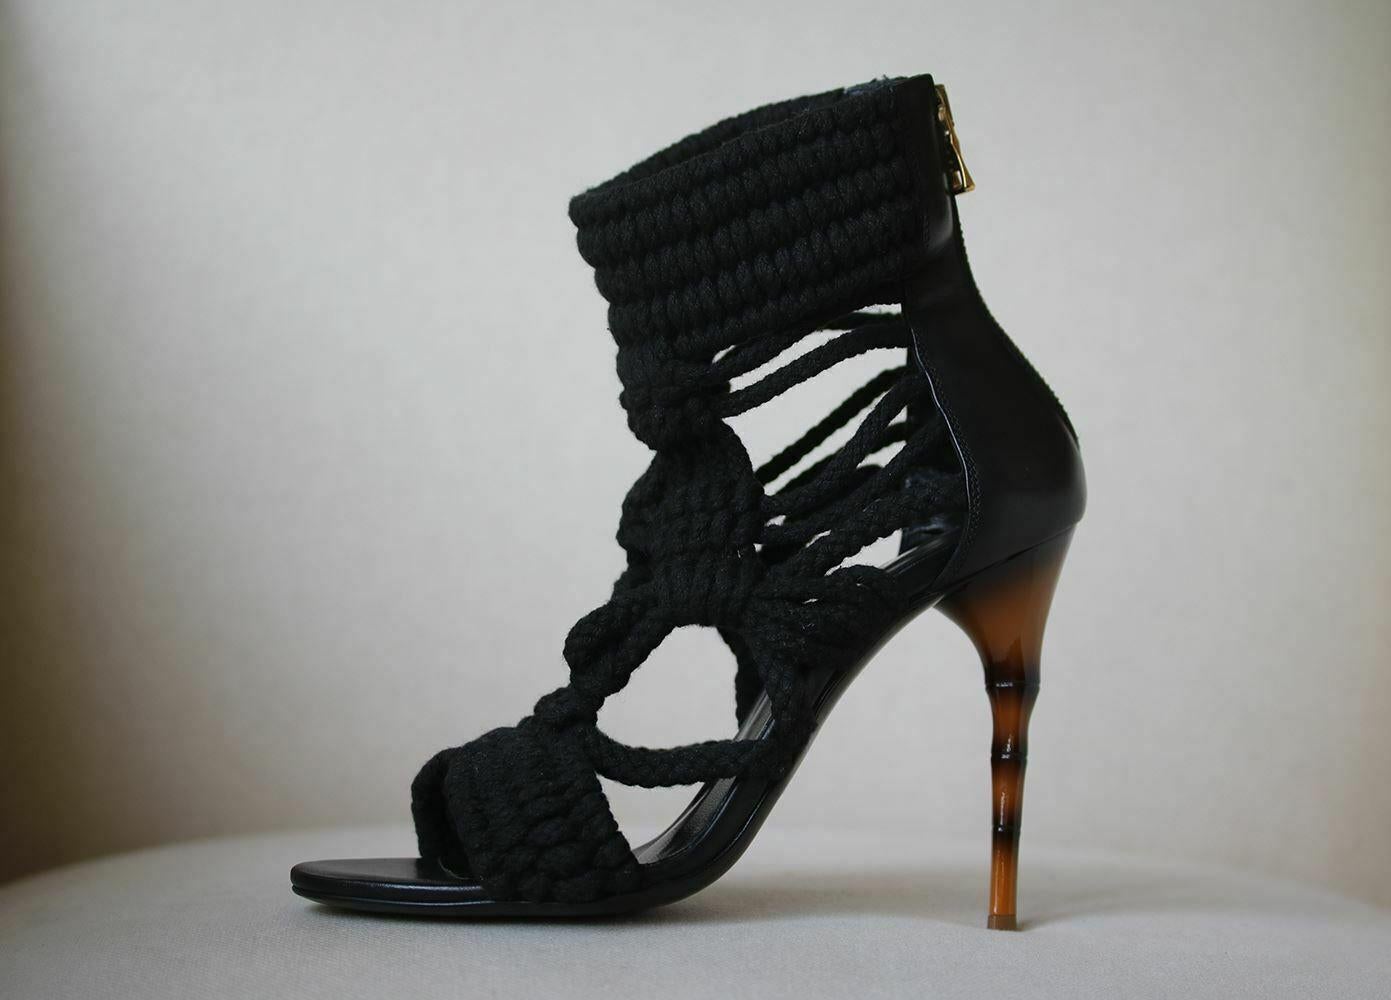 Balmain black sandals have a sturdy braided cotton straps and a smooth leather lining featuring a tortoiseshell effect acrylic heel.
Heel measures approximately 110 mm/ 4.5 inches.
Black cotton and leather. 
Zip fastening along back.
Does not come